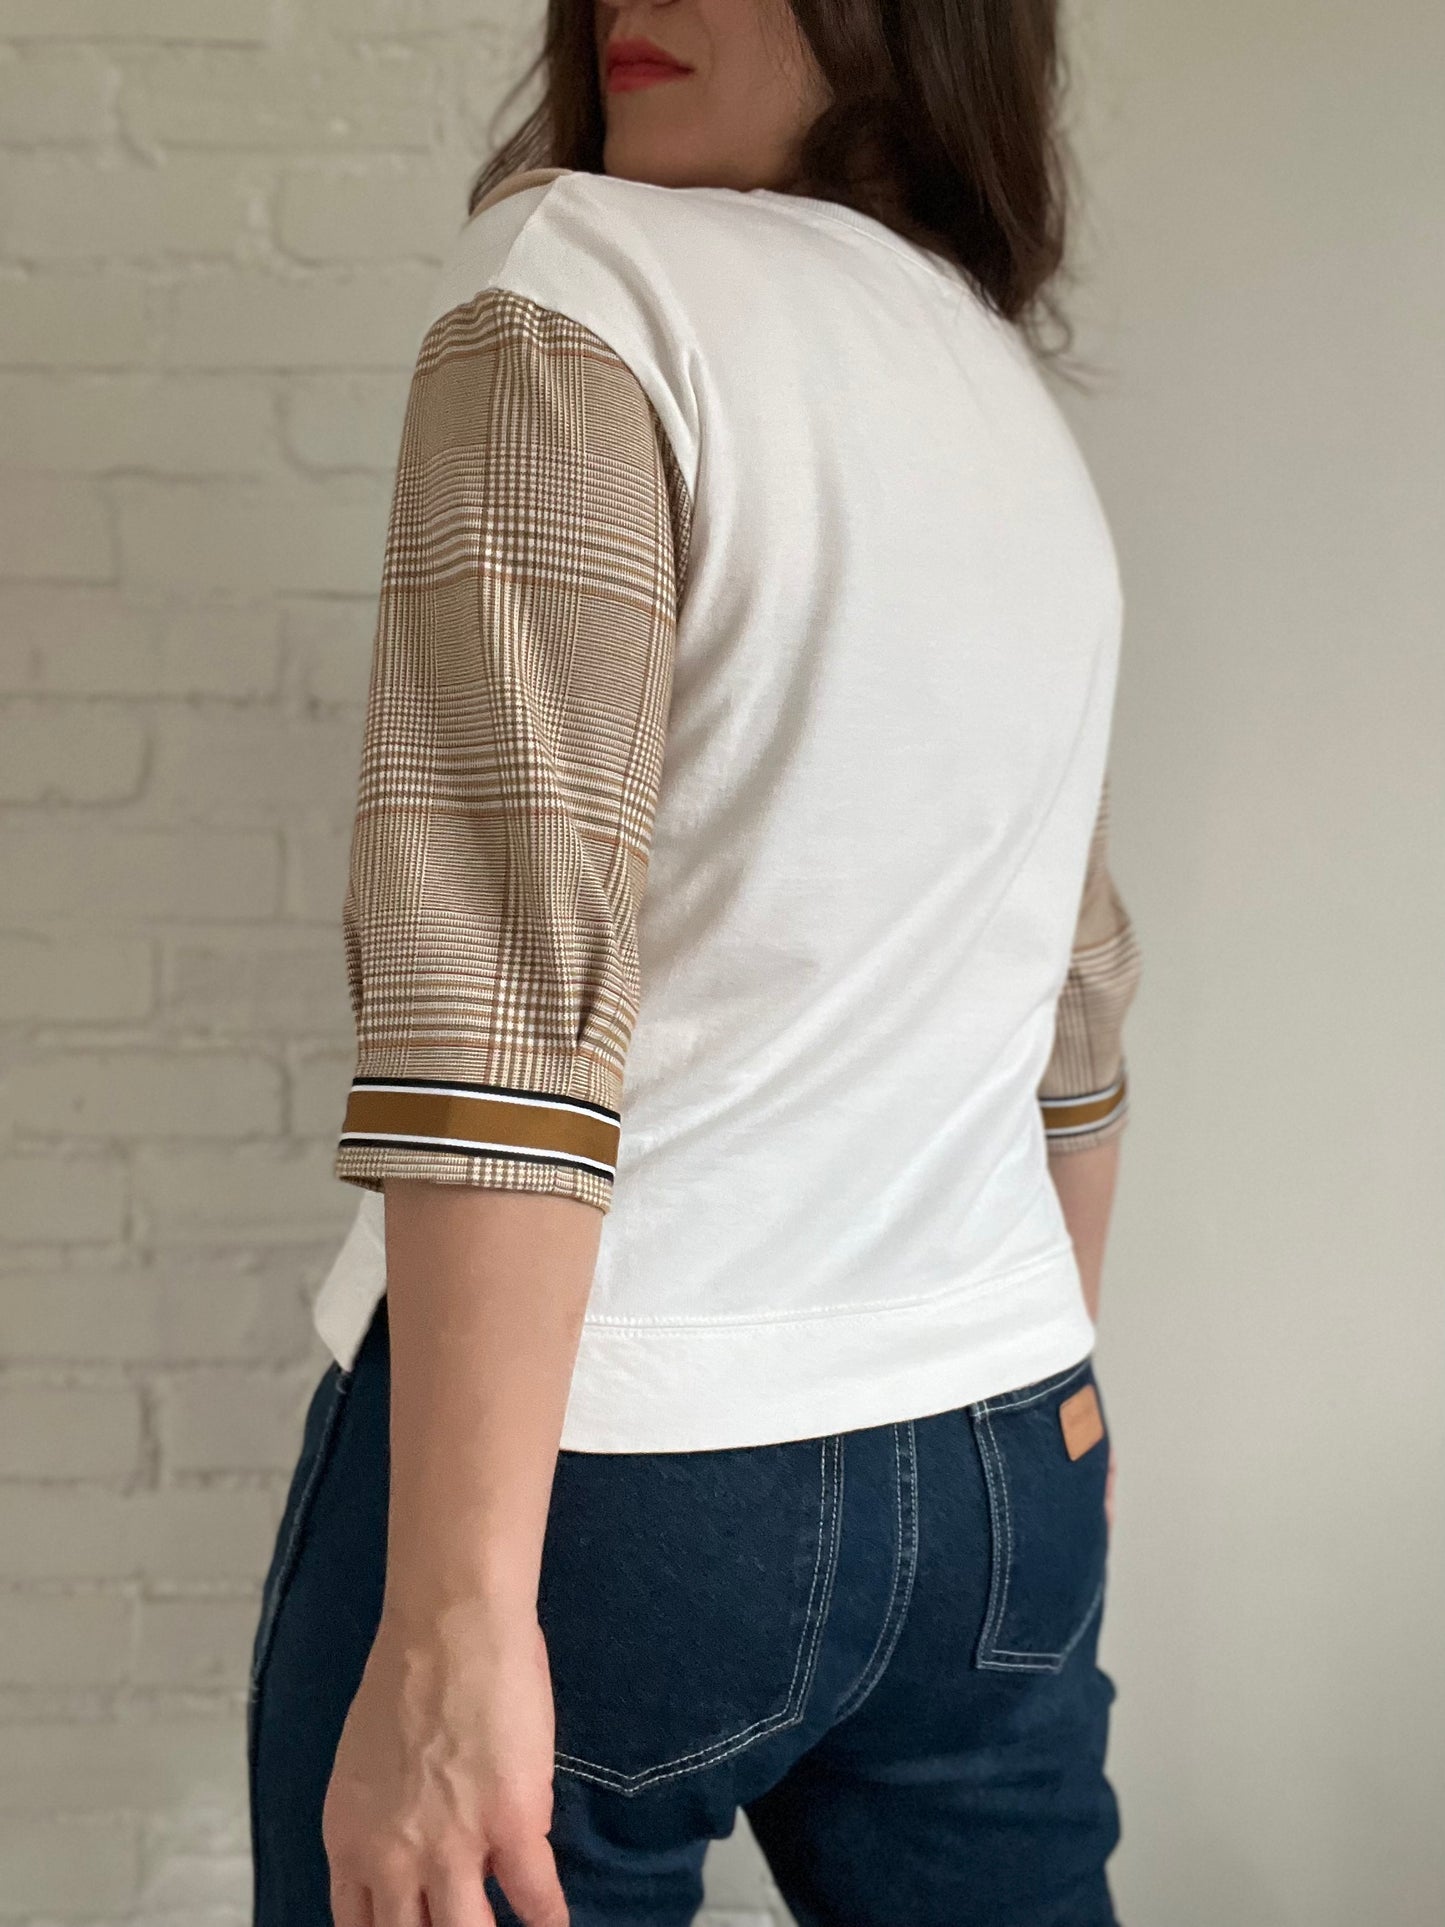 Gingham Beige White Tee - Size S/M